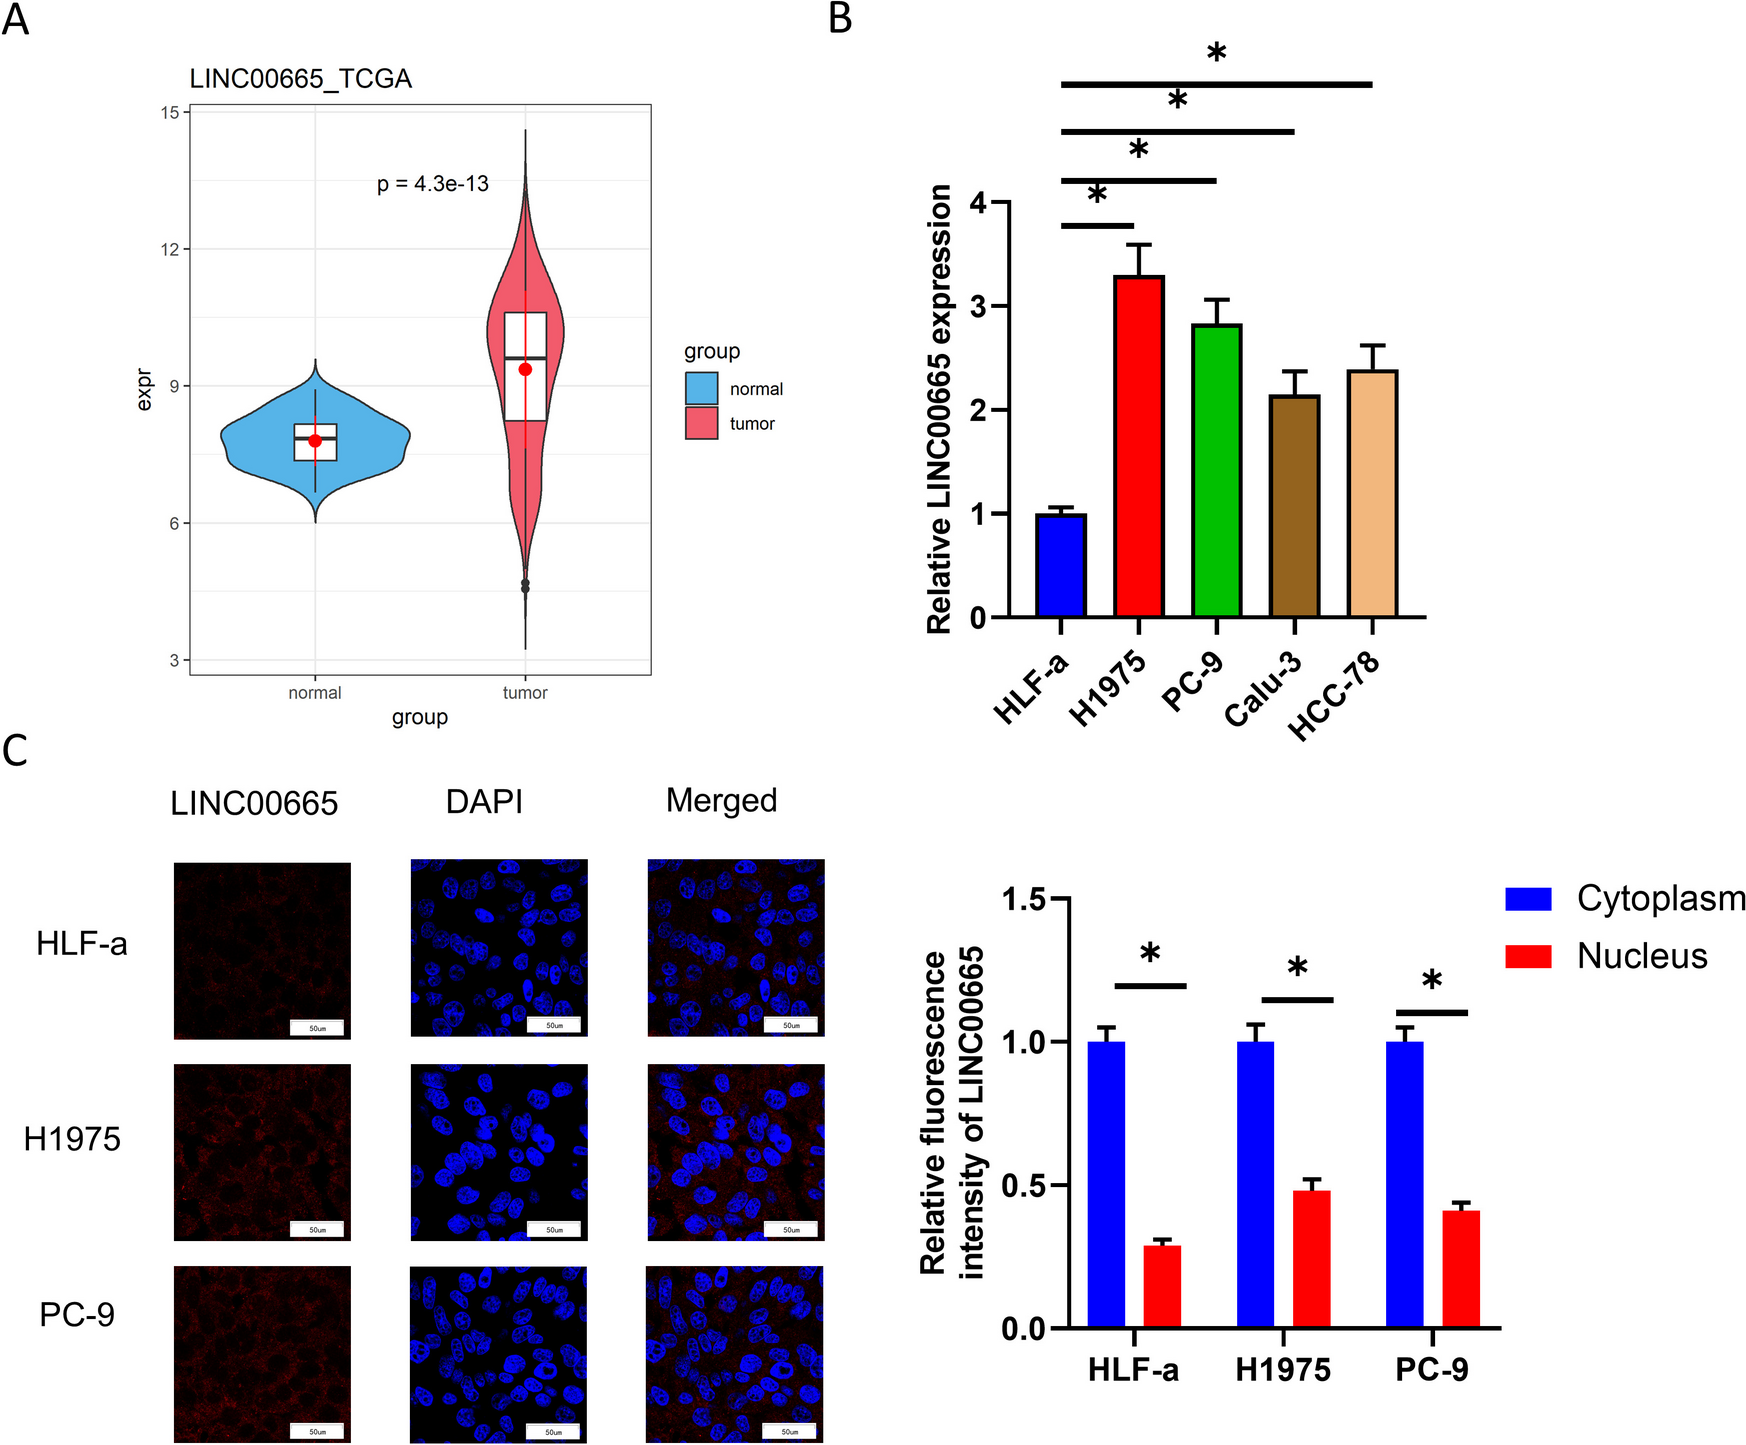 LINC00665 promotes glycolysis in lung adenocarcinoma cells via the let-7c-5p/HMMR axis